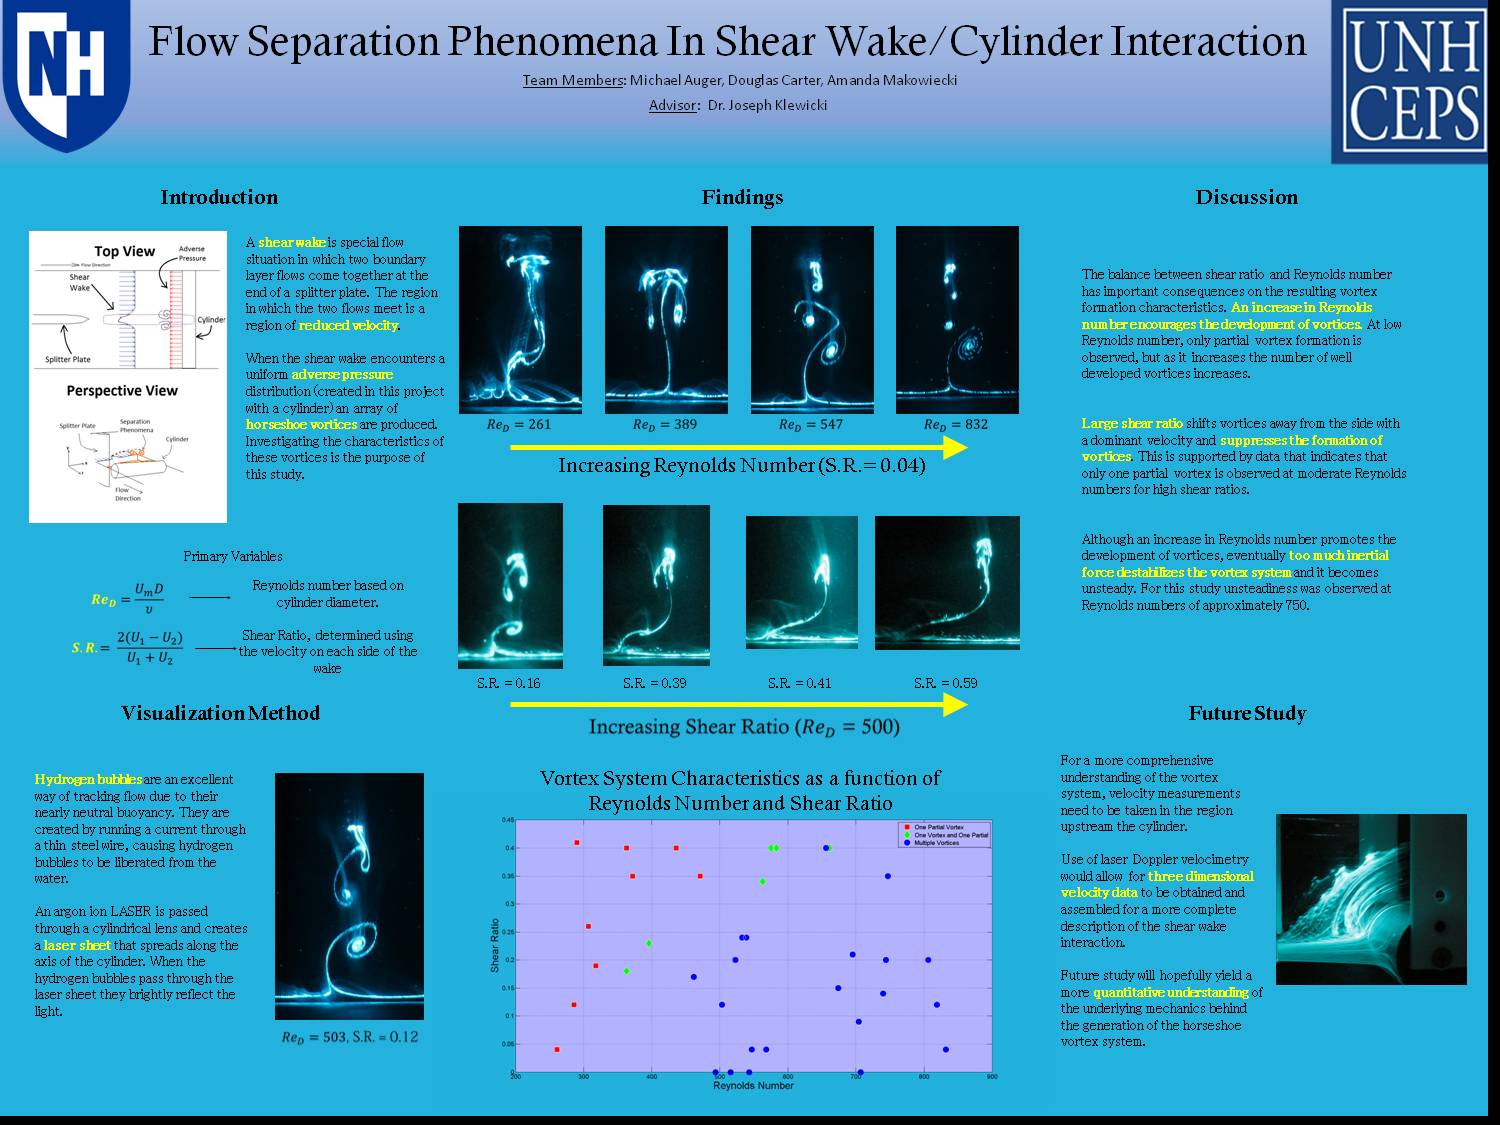 Flow Separation Phenomena In Shear Wake/Cylinder Interaction by dwk28